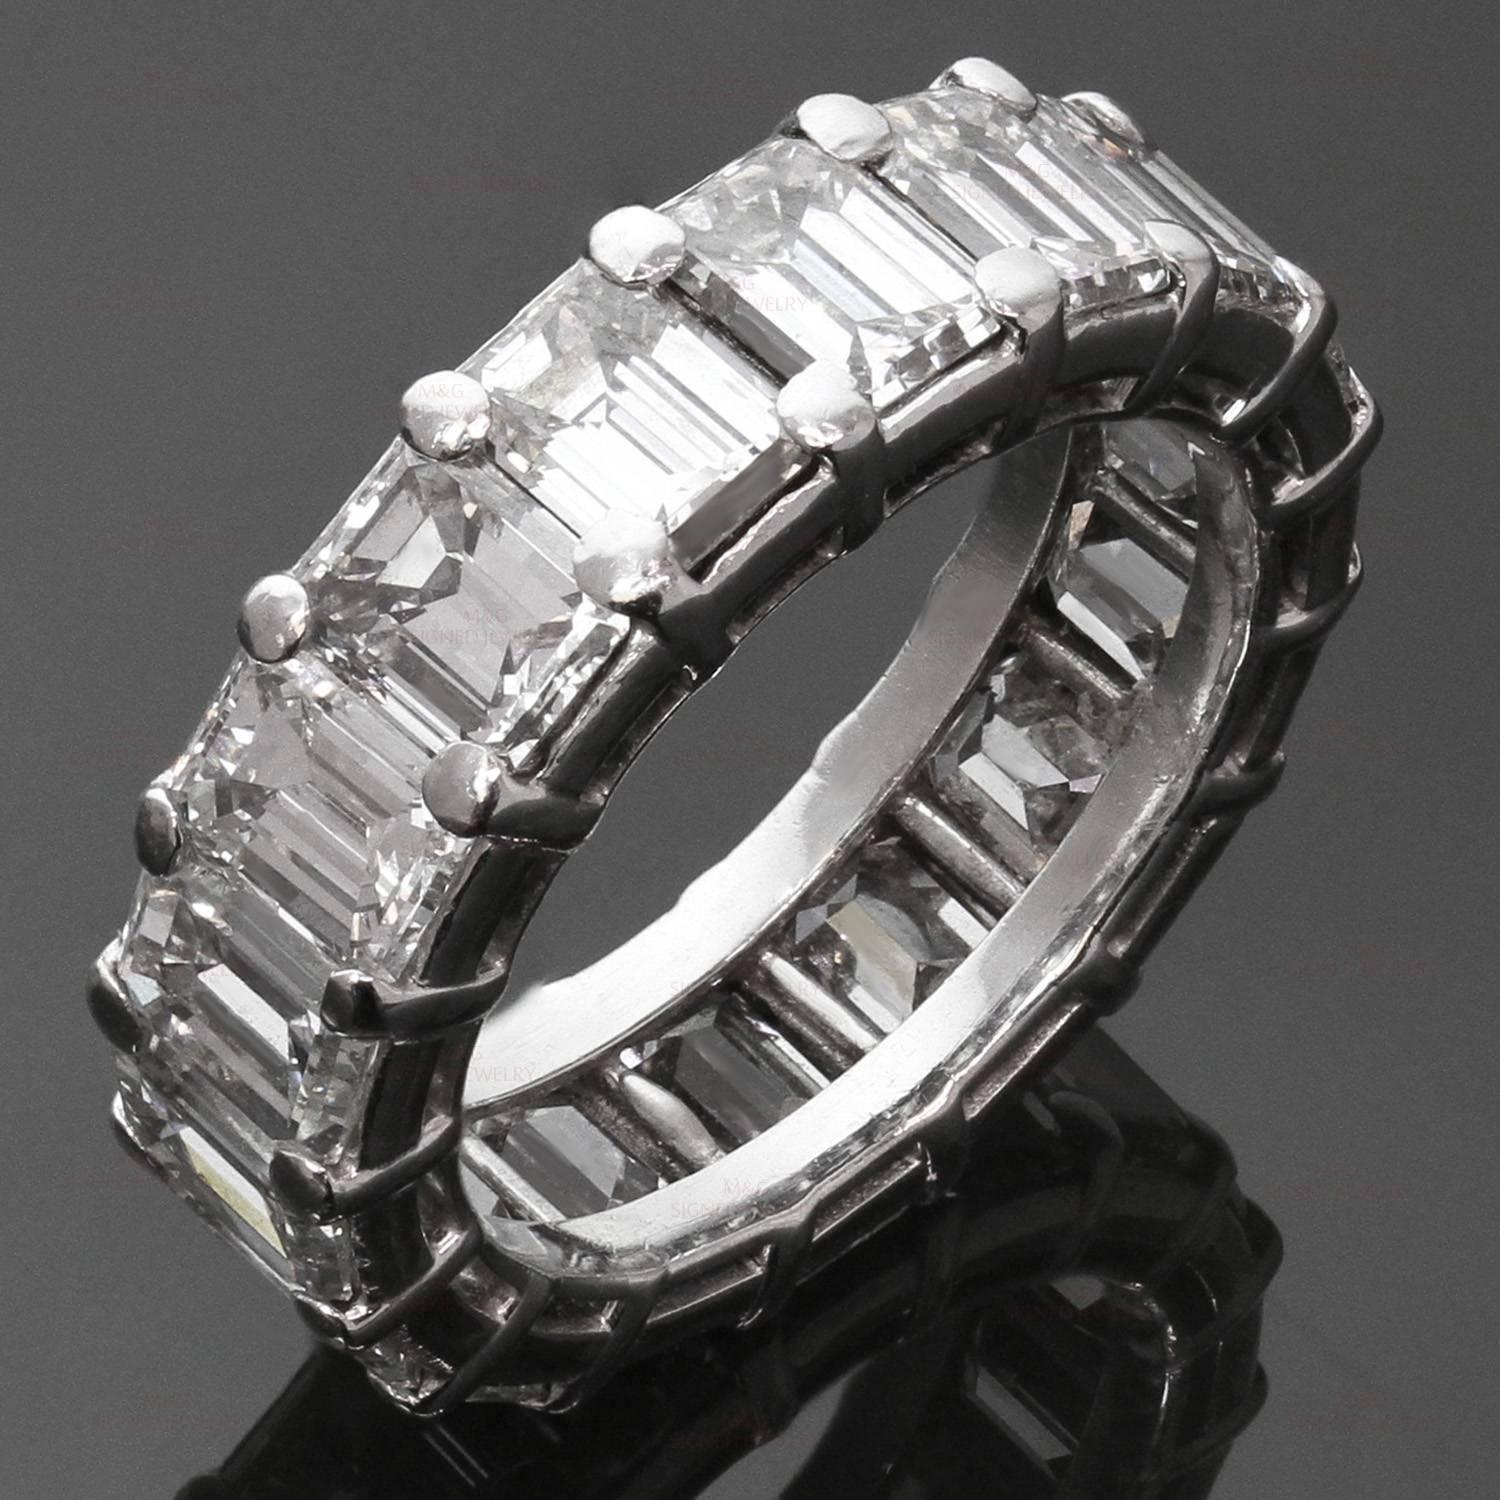 This exquisite eternity band by Graff is crafted in fine platinum and set with emerald-cut diamonds of an estimated 8.50 carats. Made in United States circa 1990s.  Measurements: 0.23